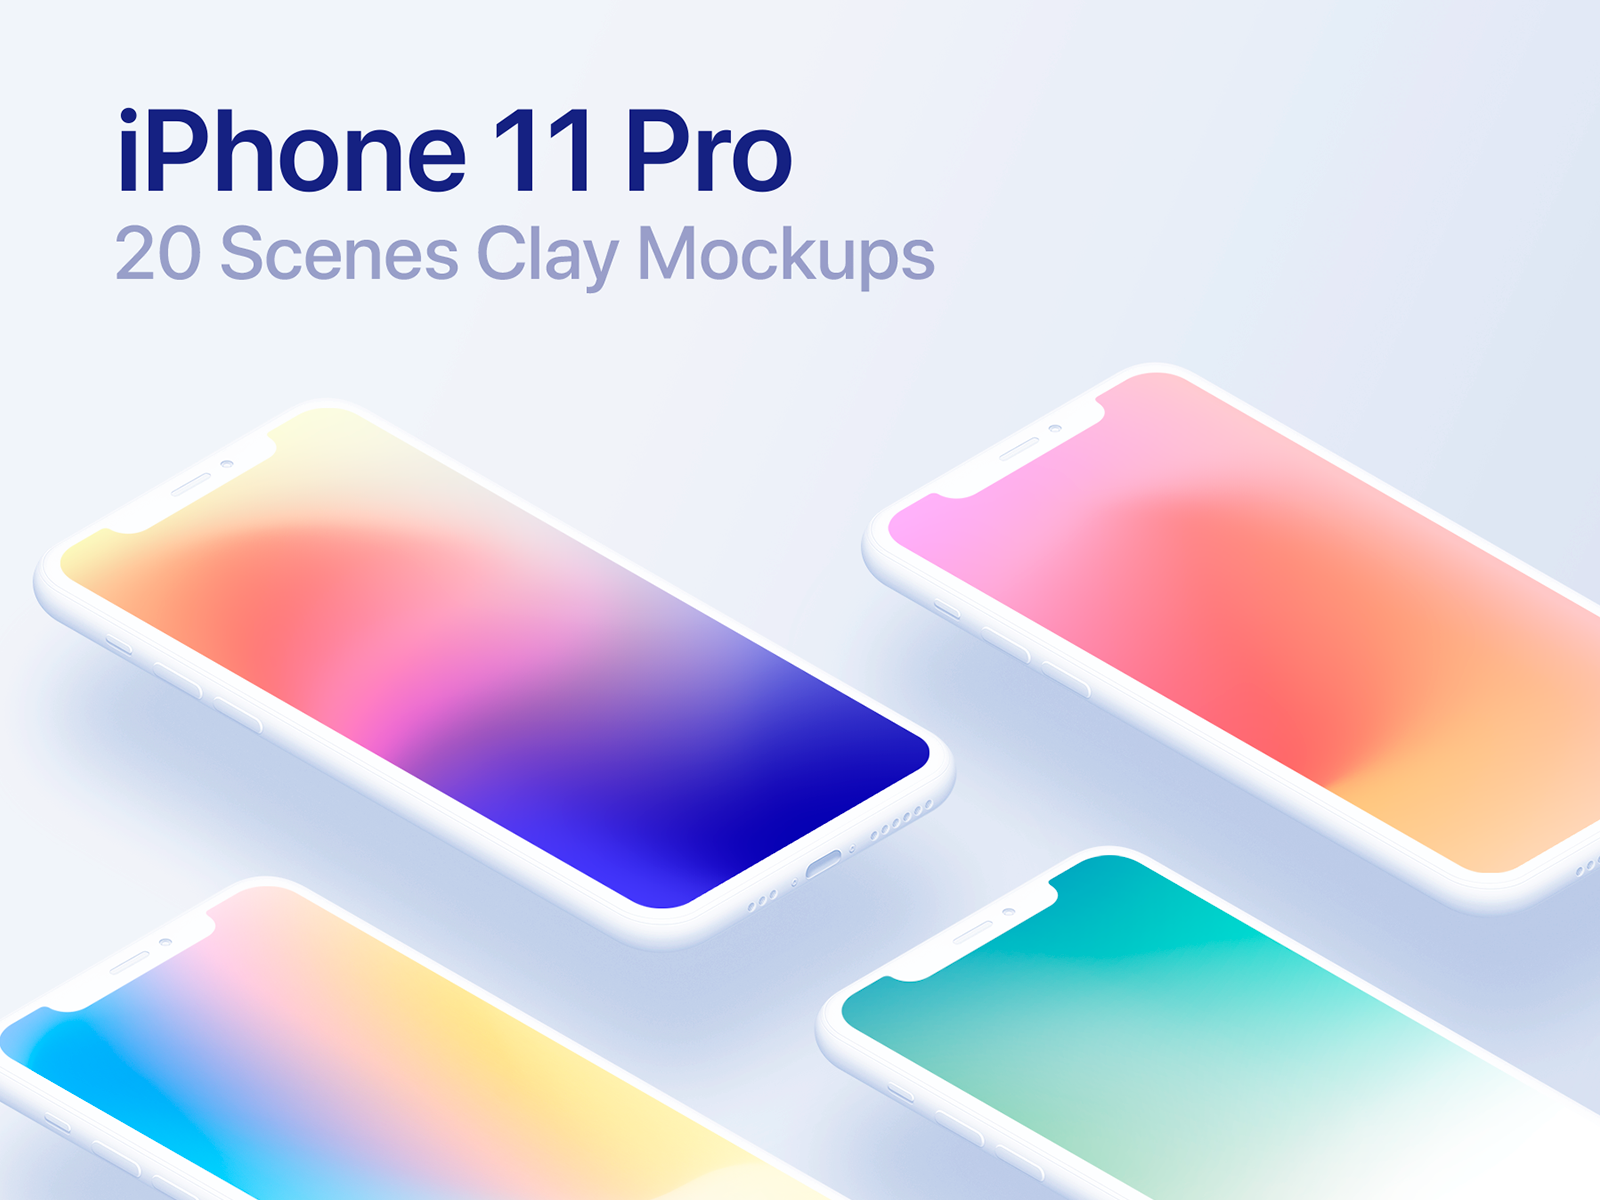 iPhone 11 Pro - 20 Mockups Clay Scenes - PSD by Asylab on Dribbble